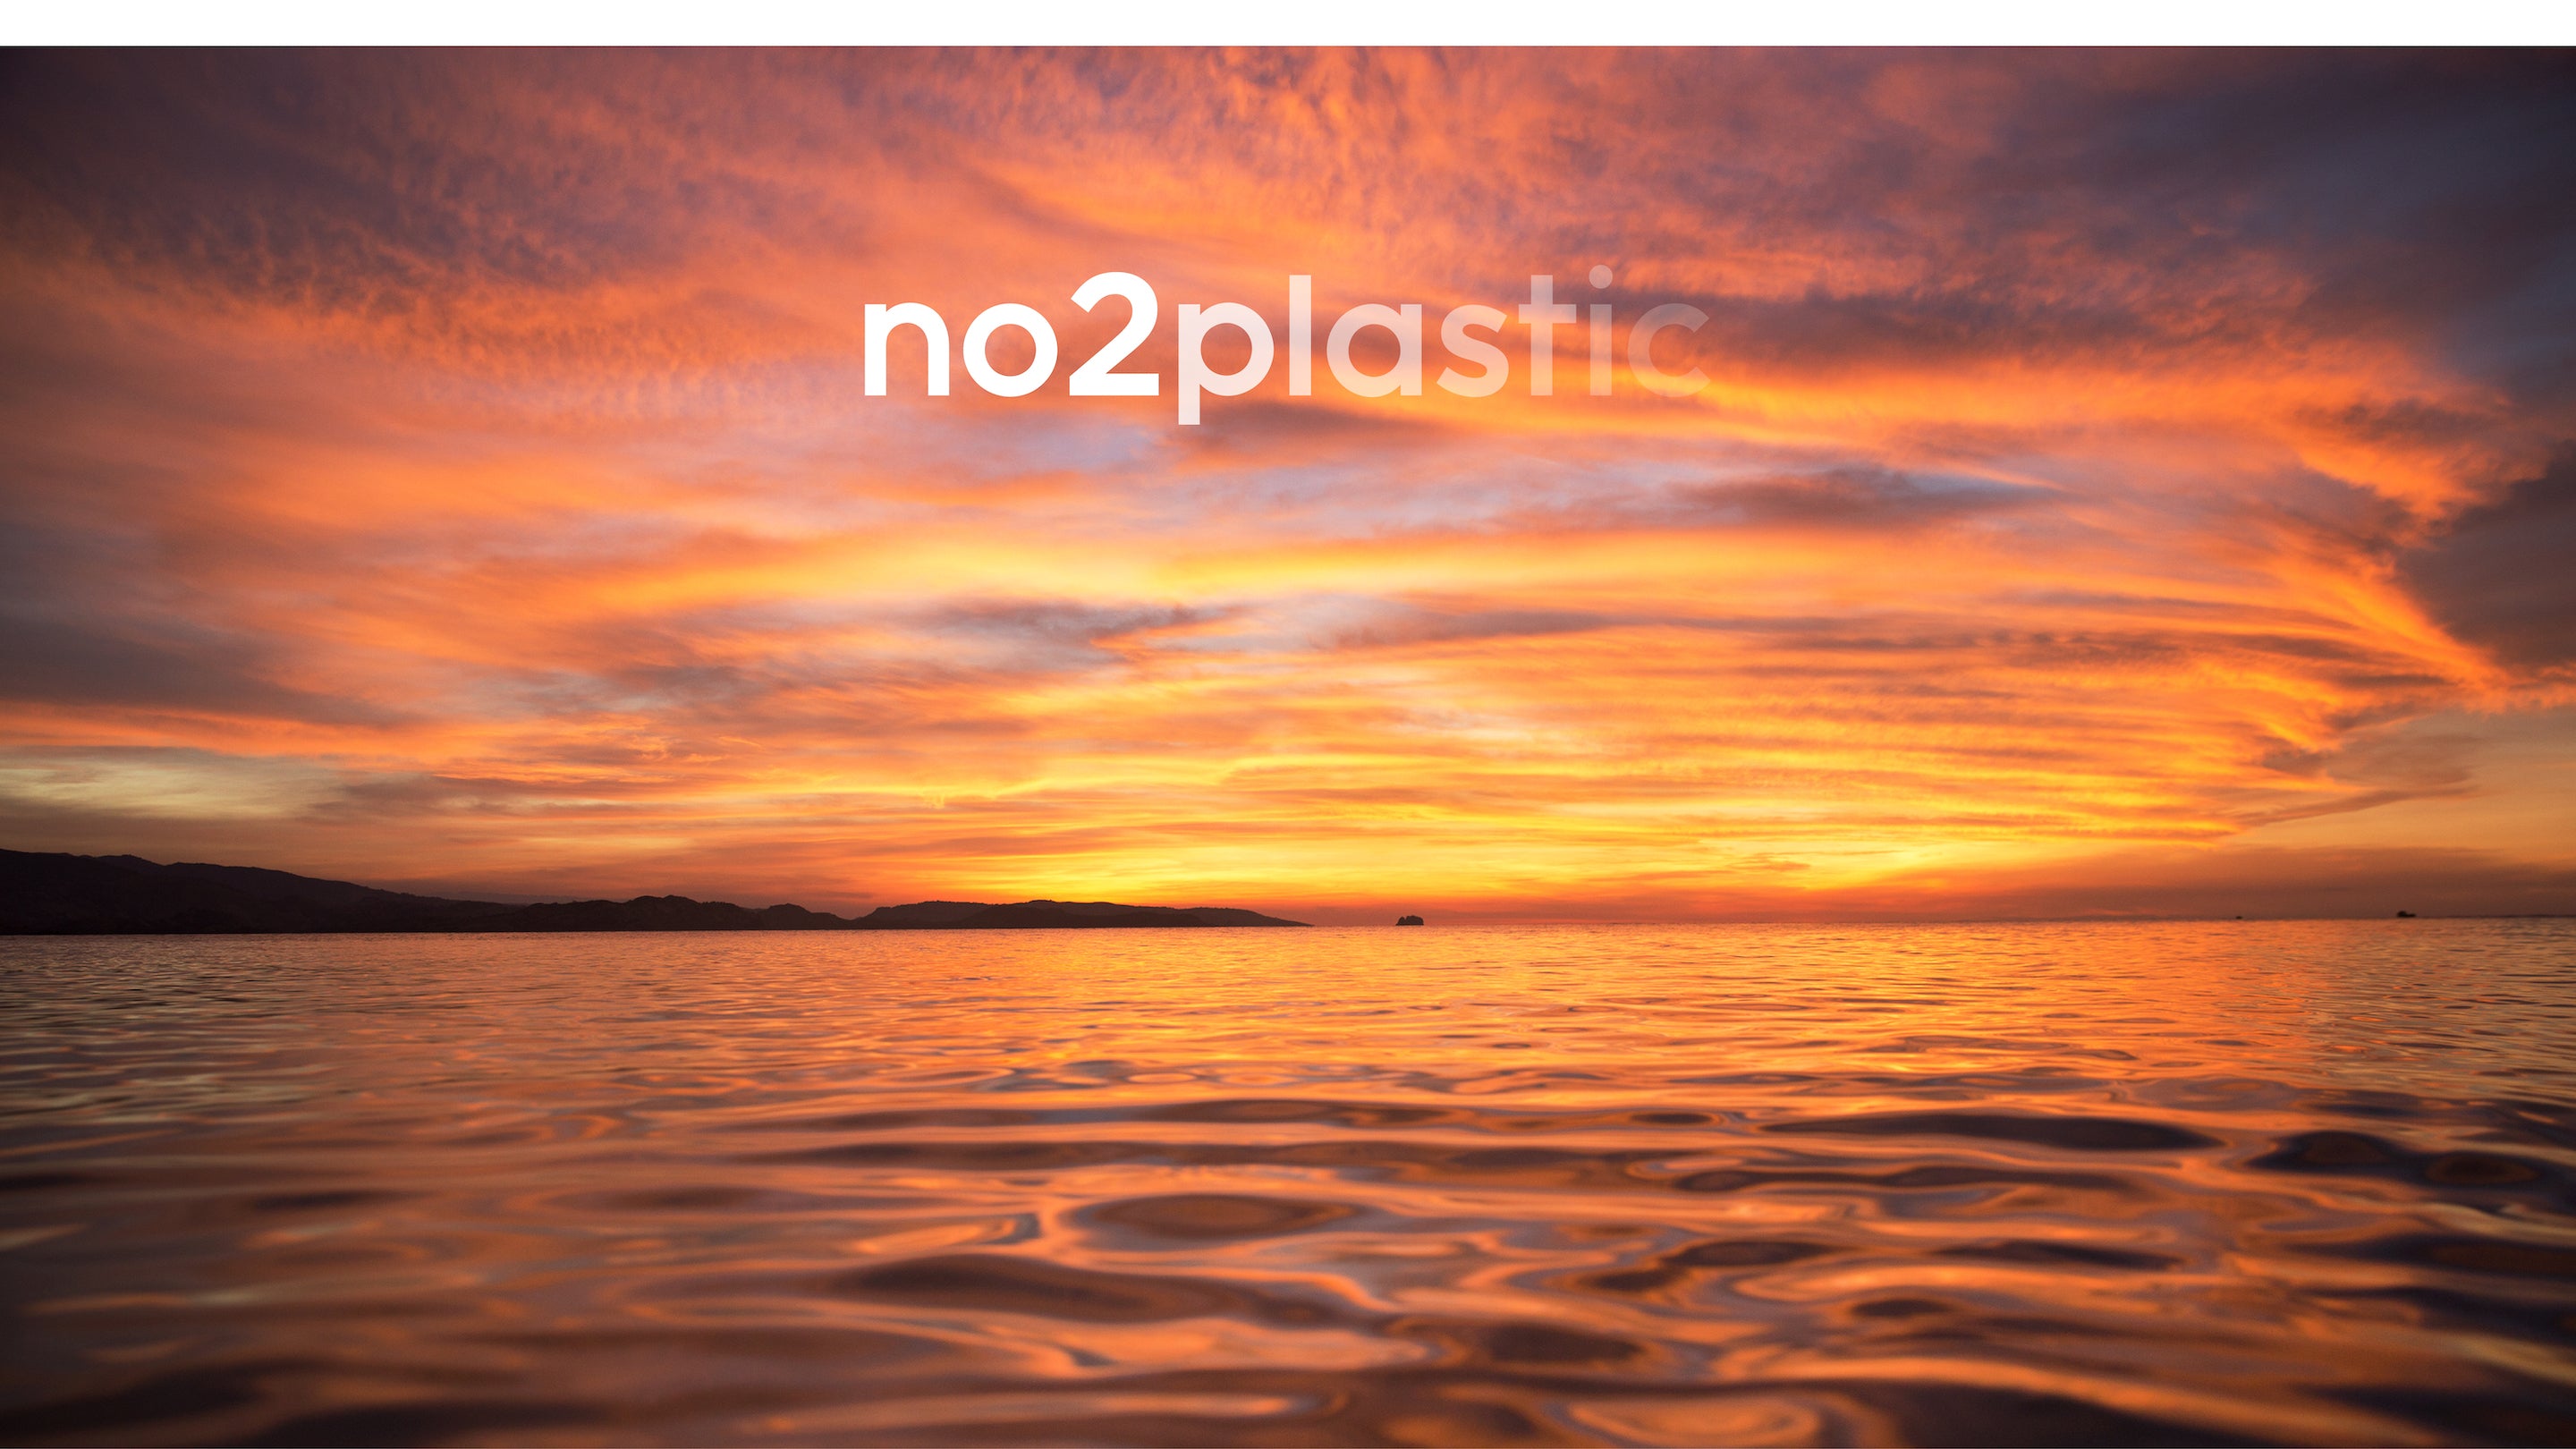 WE BELIEVE The problems with single-use plastics are growing daily and we need to stop filling our landfills and oceans with plastic waste. Take the no2plastic pledge.